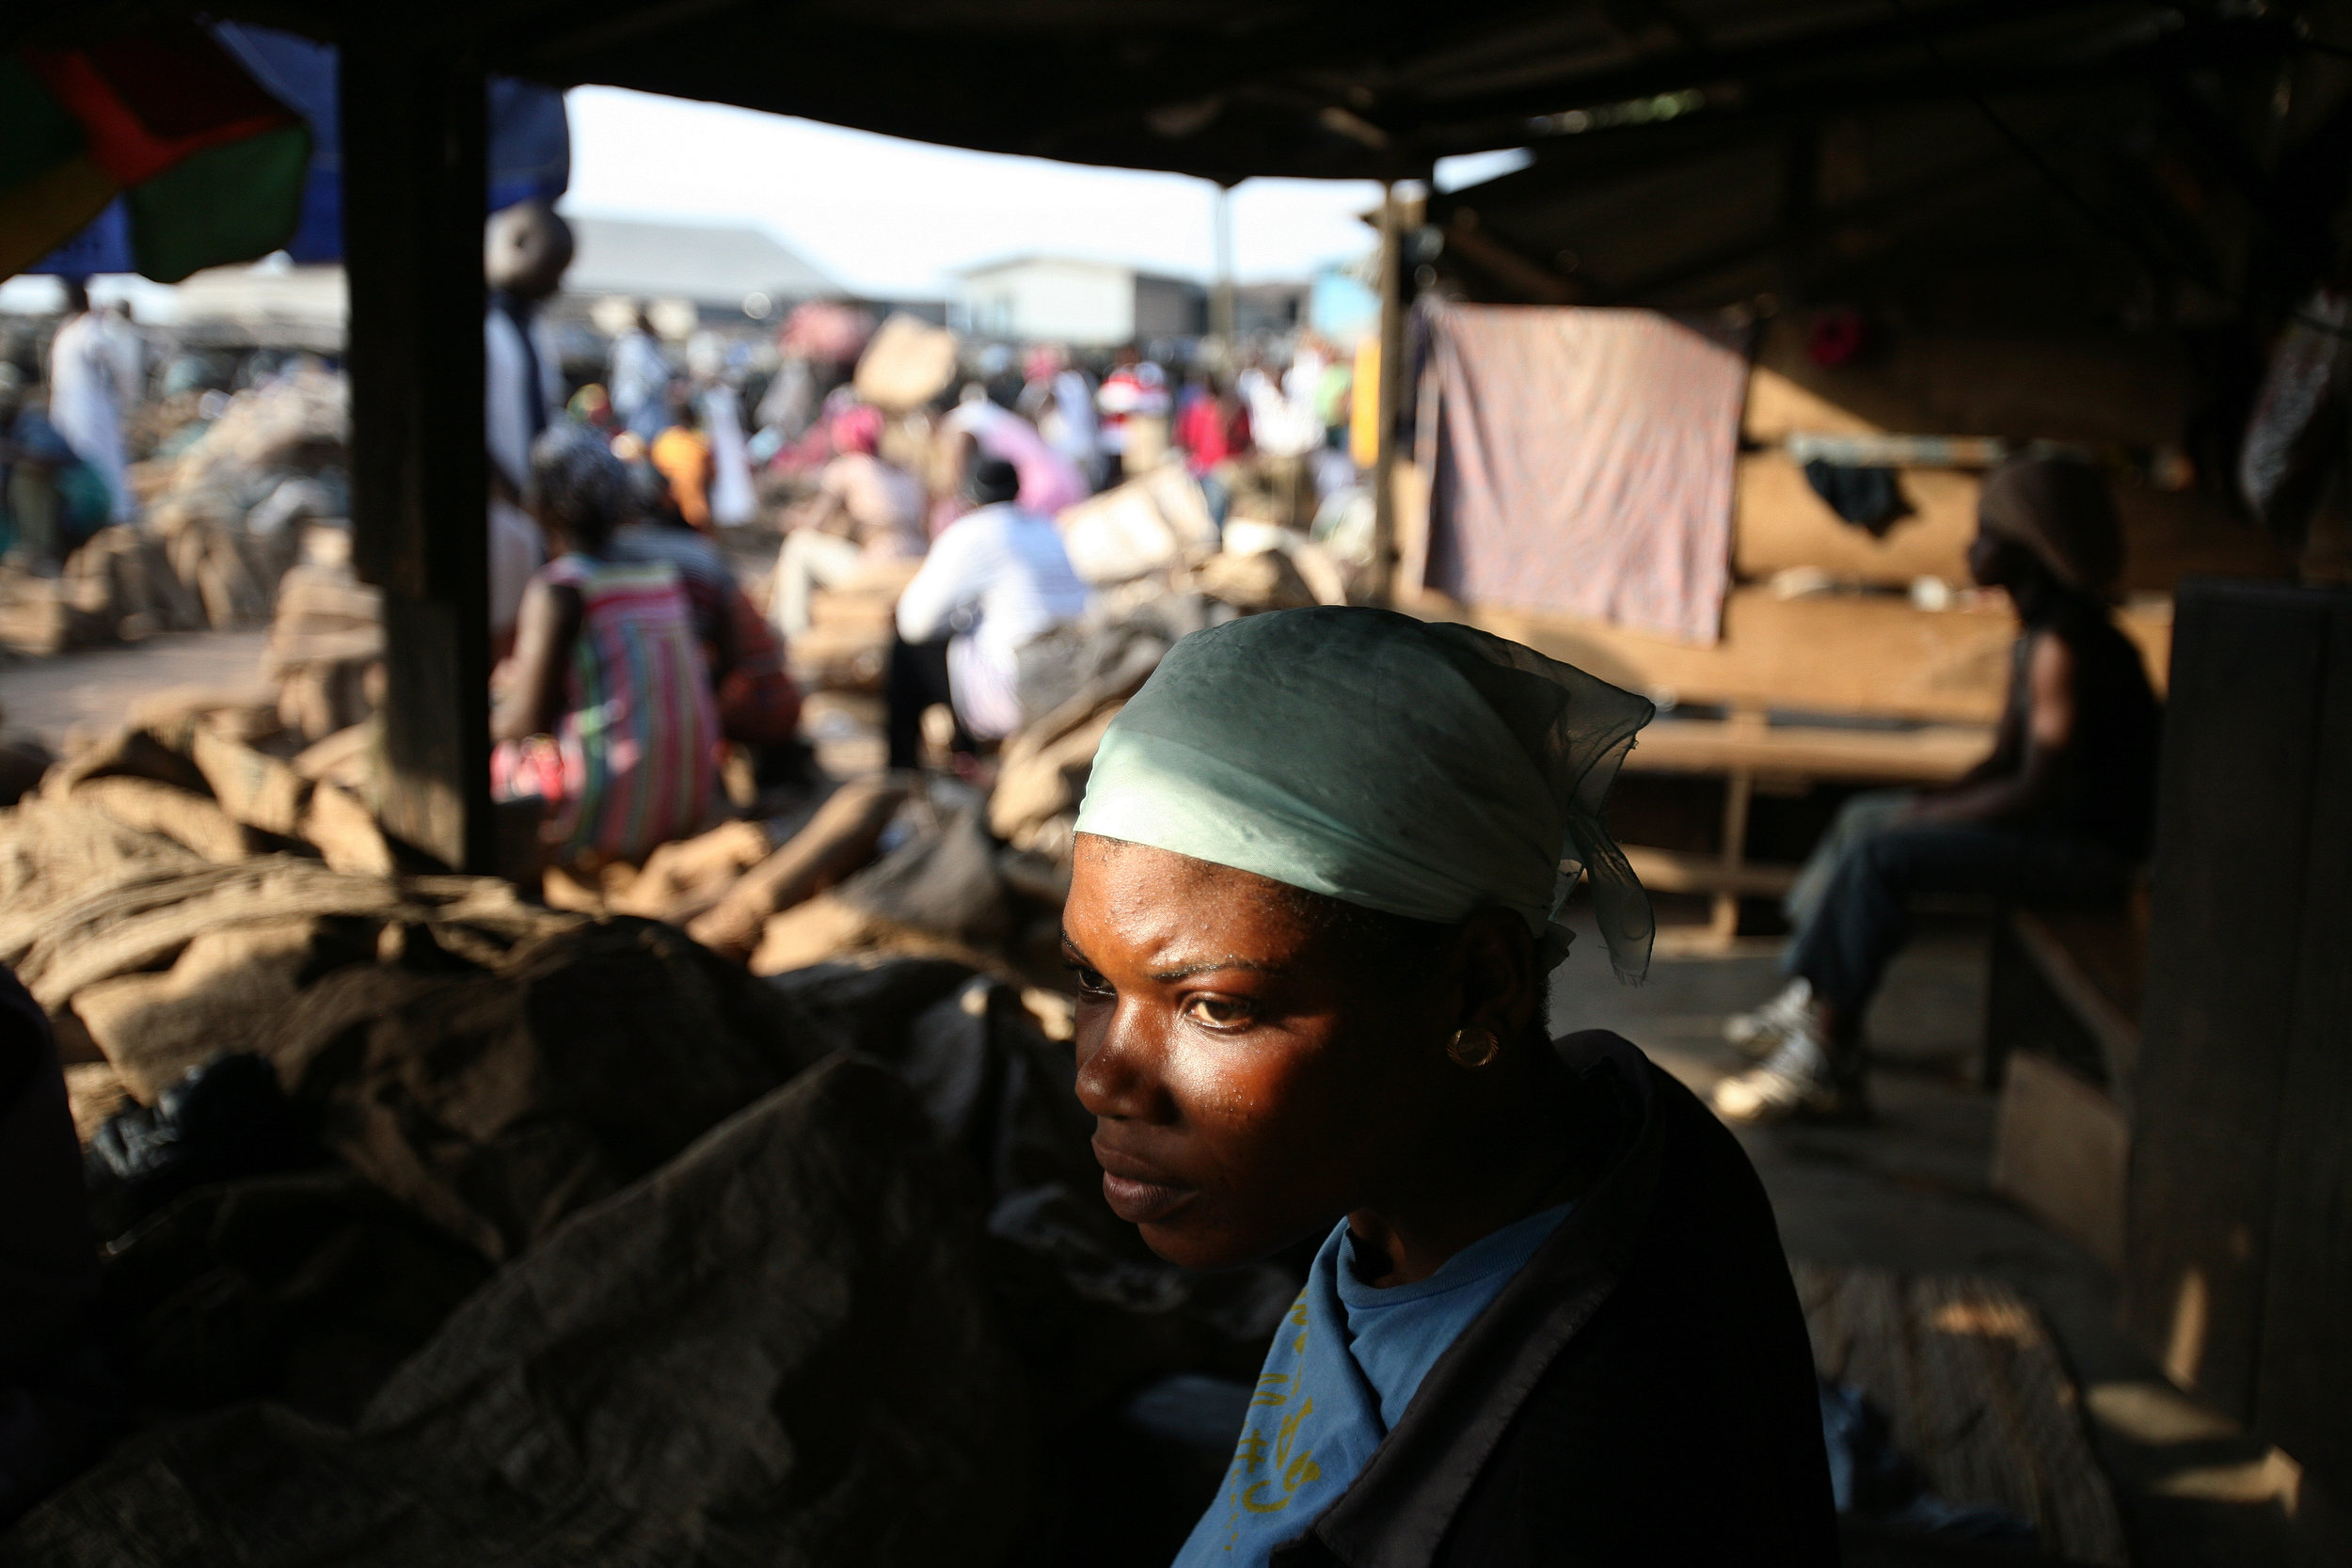  Lamisi sits and waits for work in the yam market in Accra, Ghana on Feb. 11, 2009. 